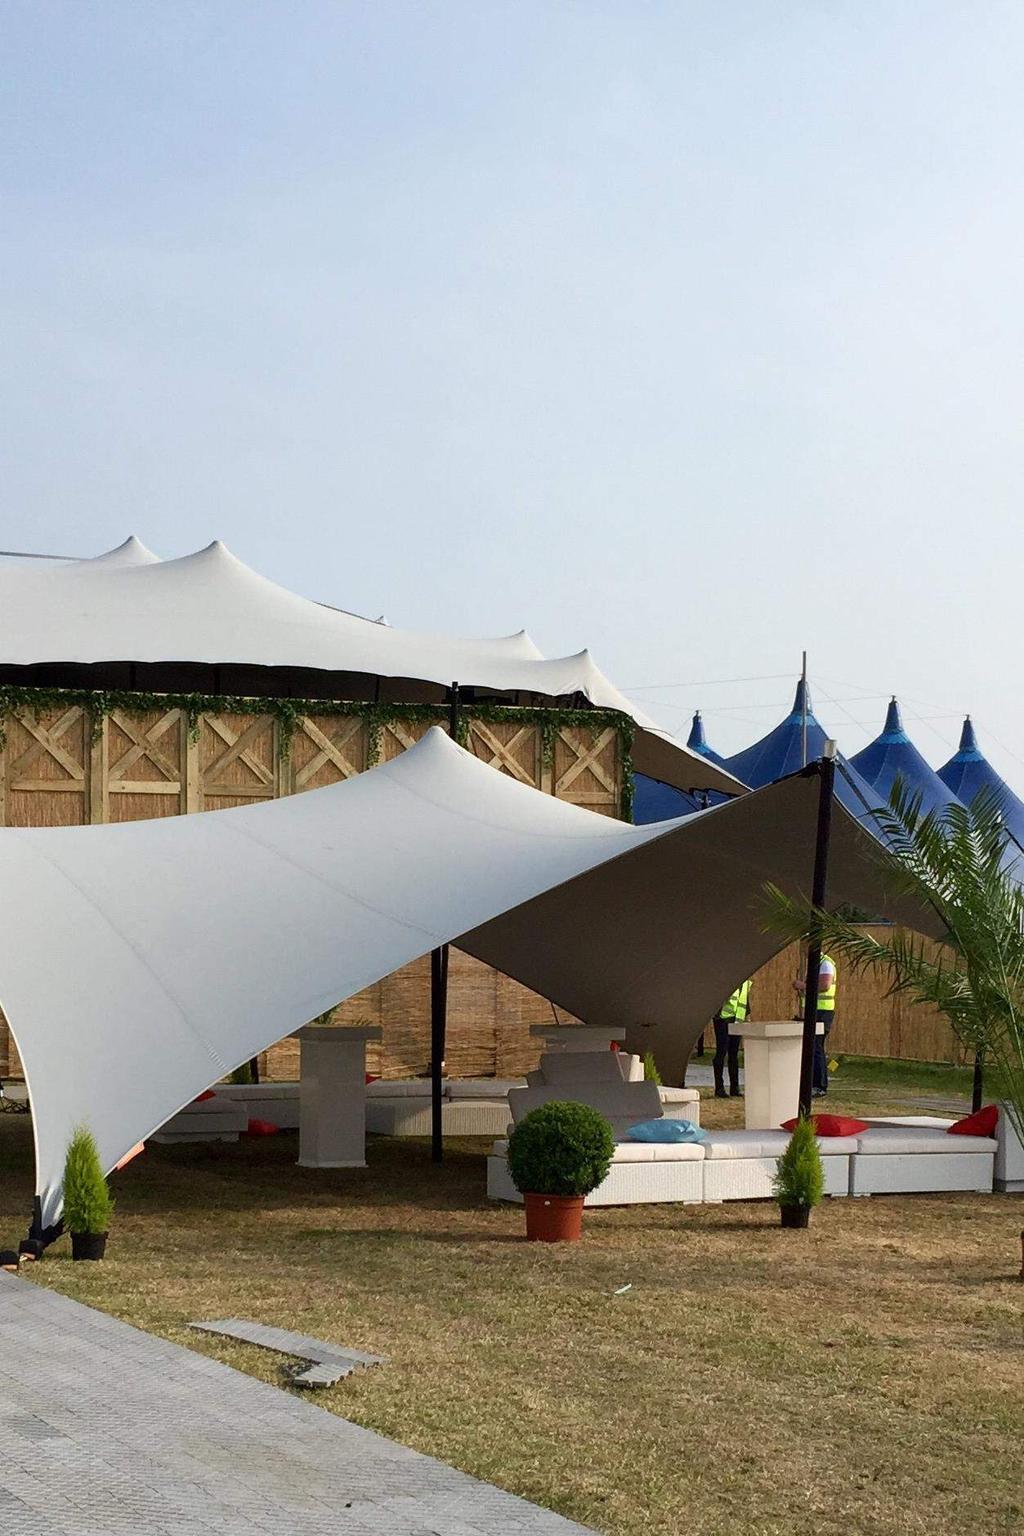 What is a stretch tent? A stretch tent is made by stretching a strong and flexible, waterproof composite material over a number of internal, aluminium poles to create a canopy.